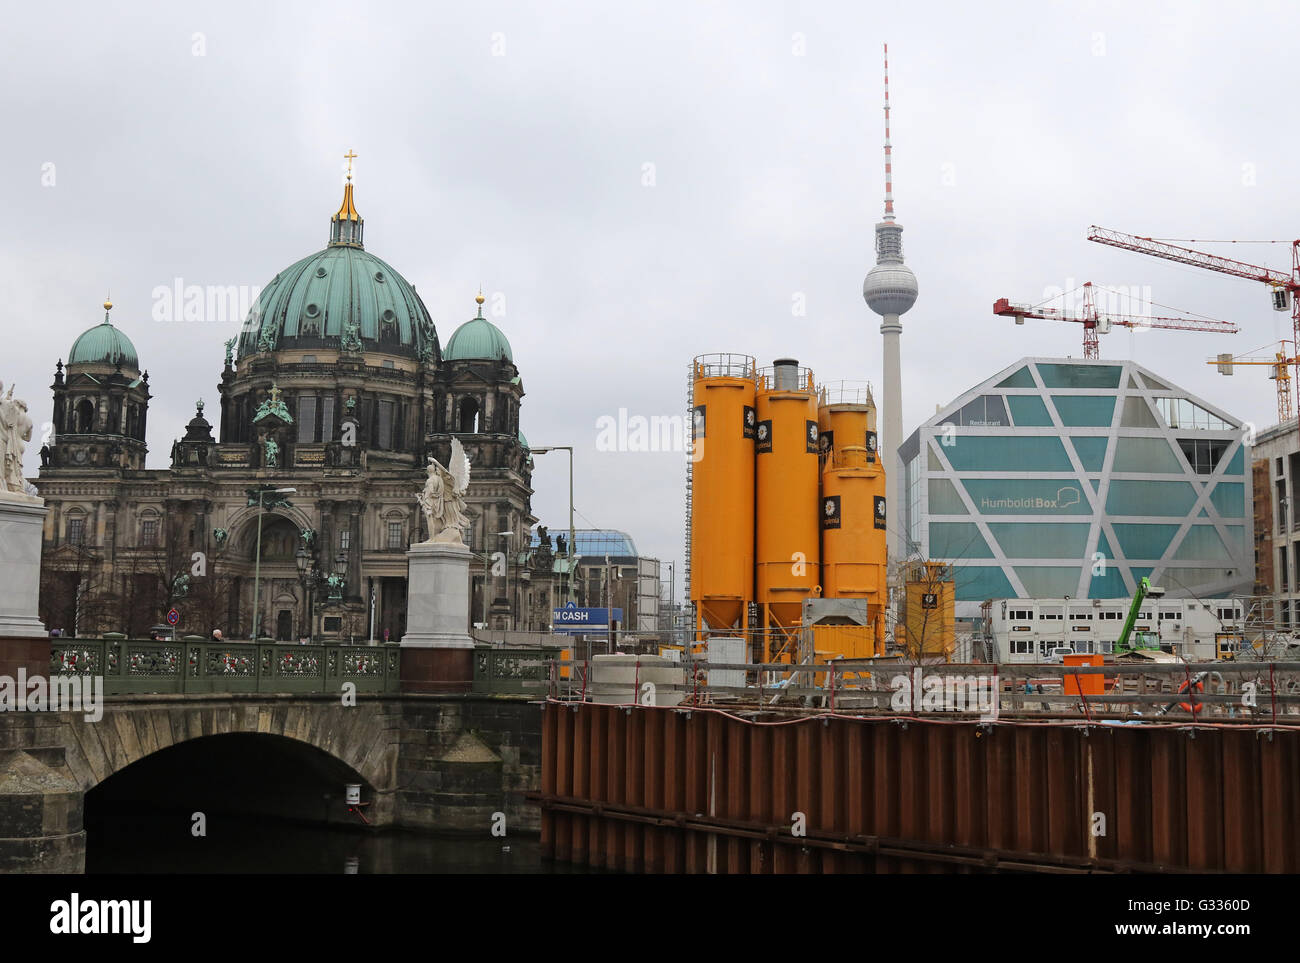 Berlin, Germany, Berliner Dom, TV Tower and Humoldt box Stock Photo